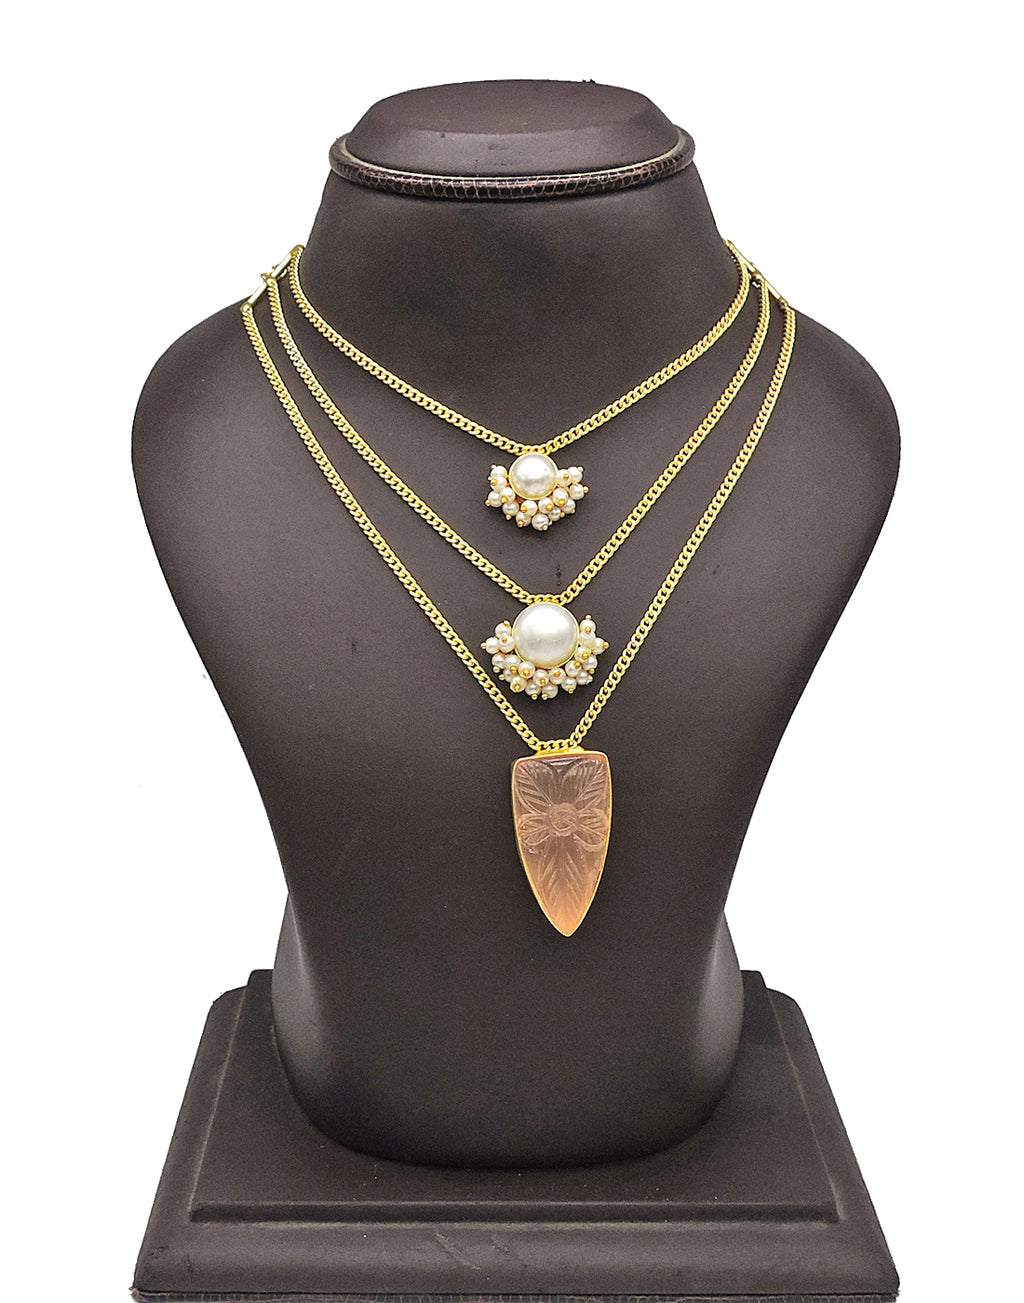 Layered Pearl Necklace - Statement Necklaces - Gold-Plated & Hypoallergenic Jewellery - Made in India - Dubai Jewellery - Dori